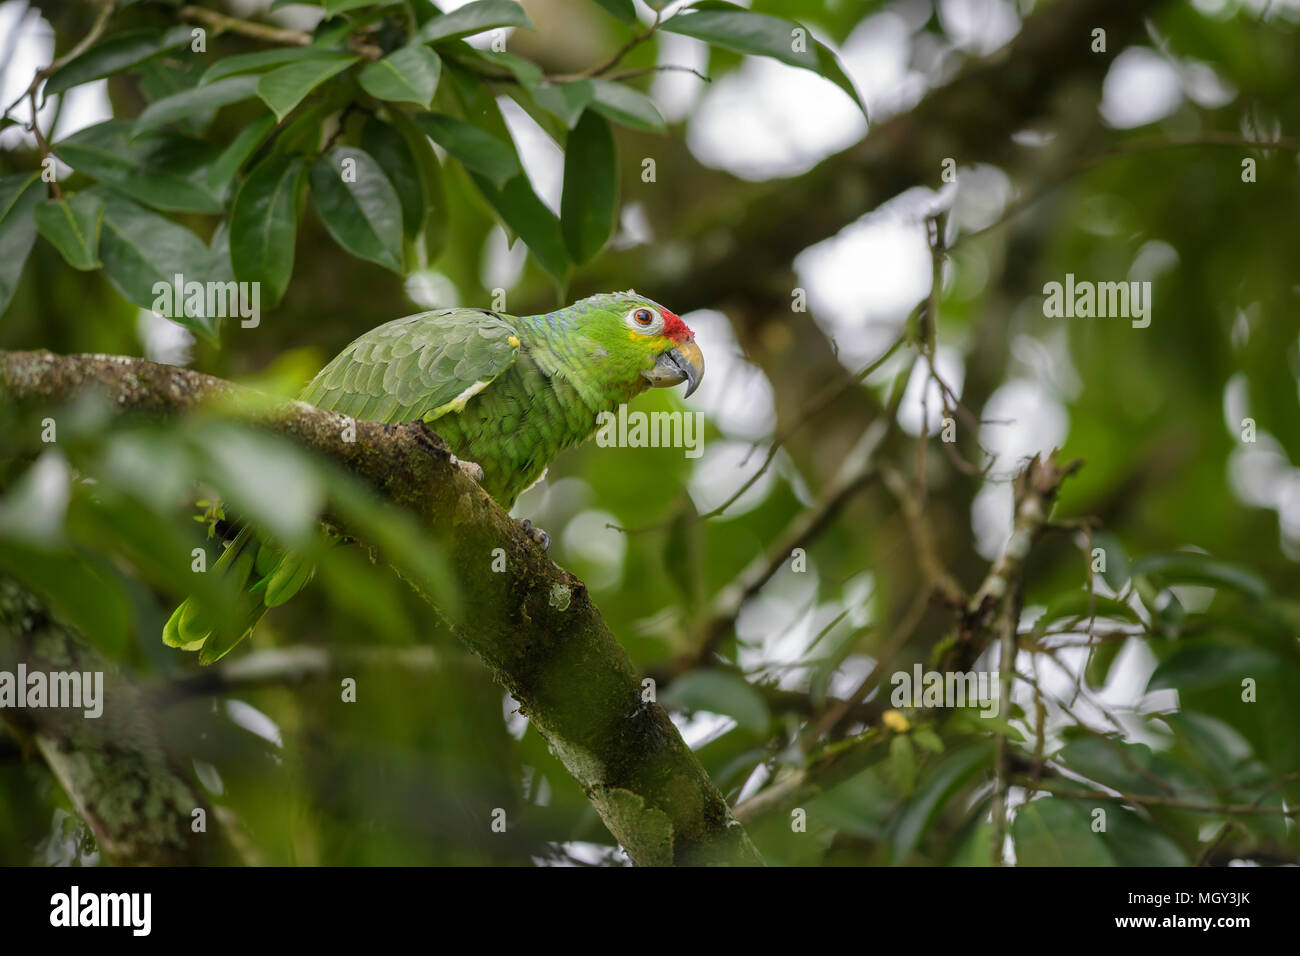 Red-lored Parrot - Amazona autumnalis, beautiful green parrot from Central America forests, Costa Rica. Stock Photo